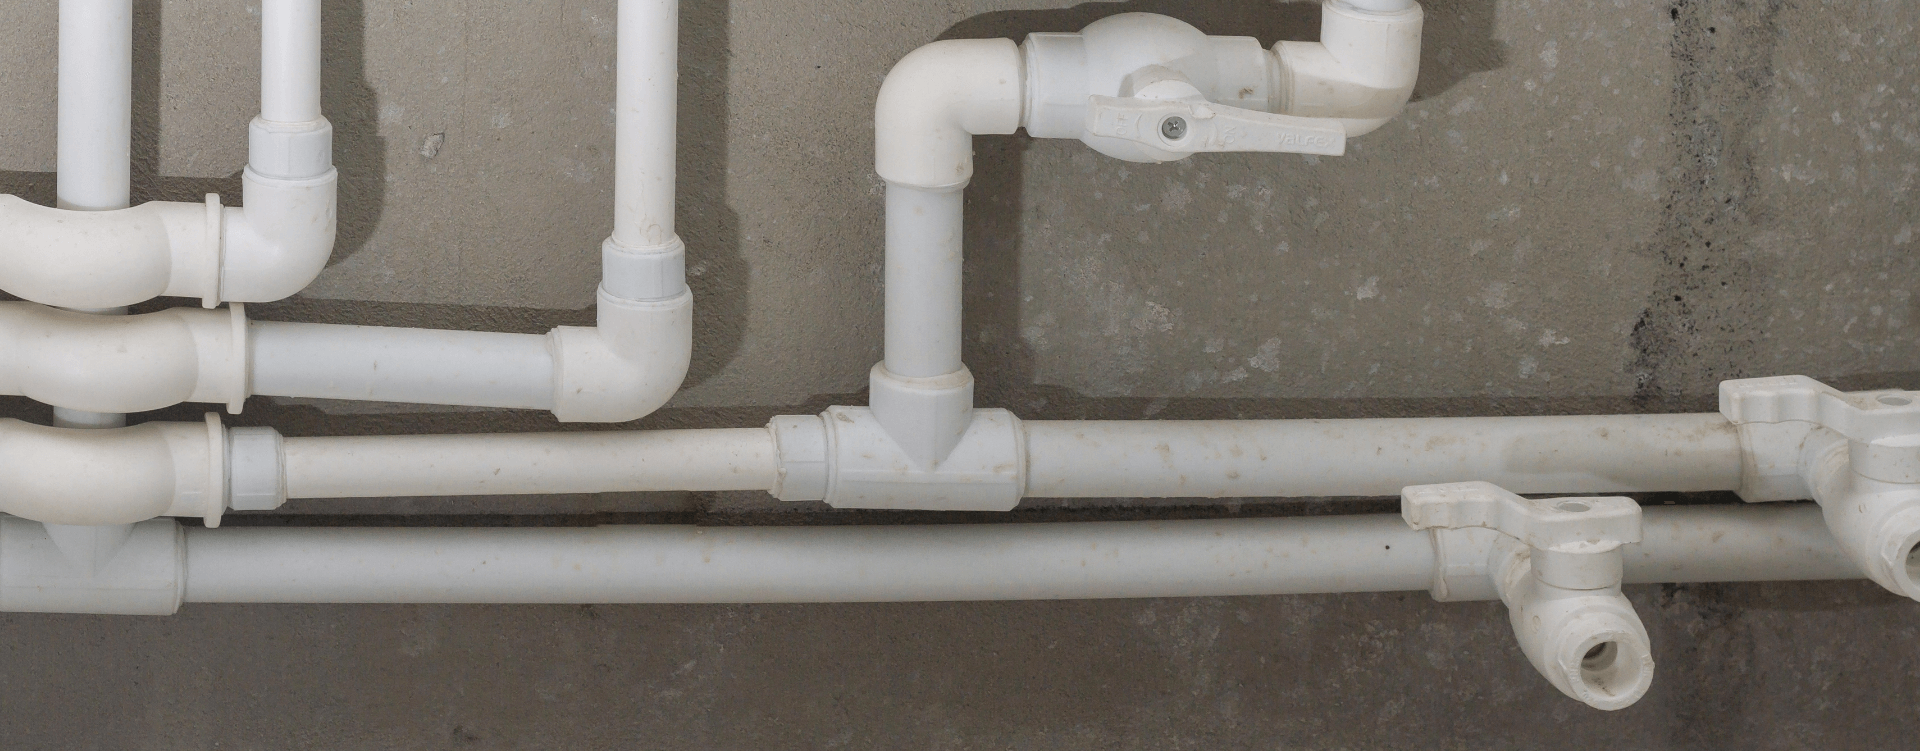 Whole-Home Repiping Banner Image